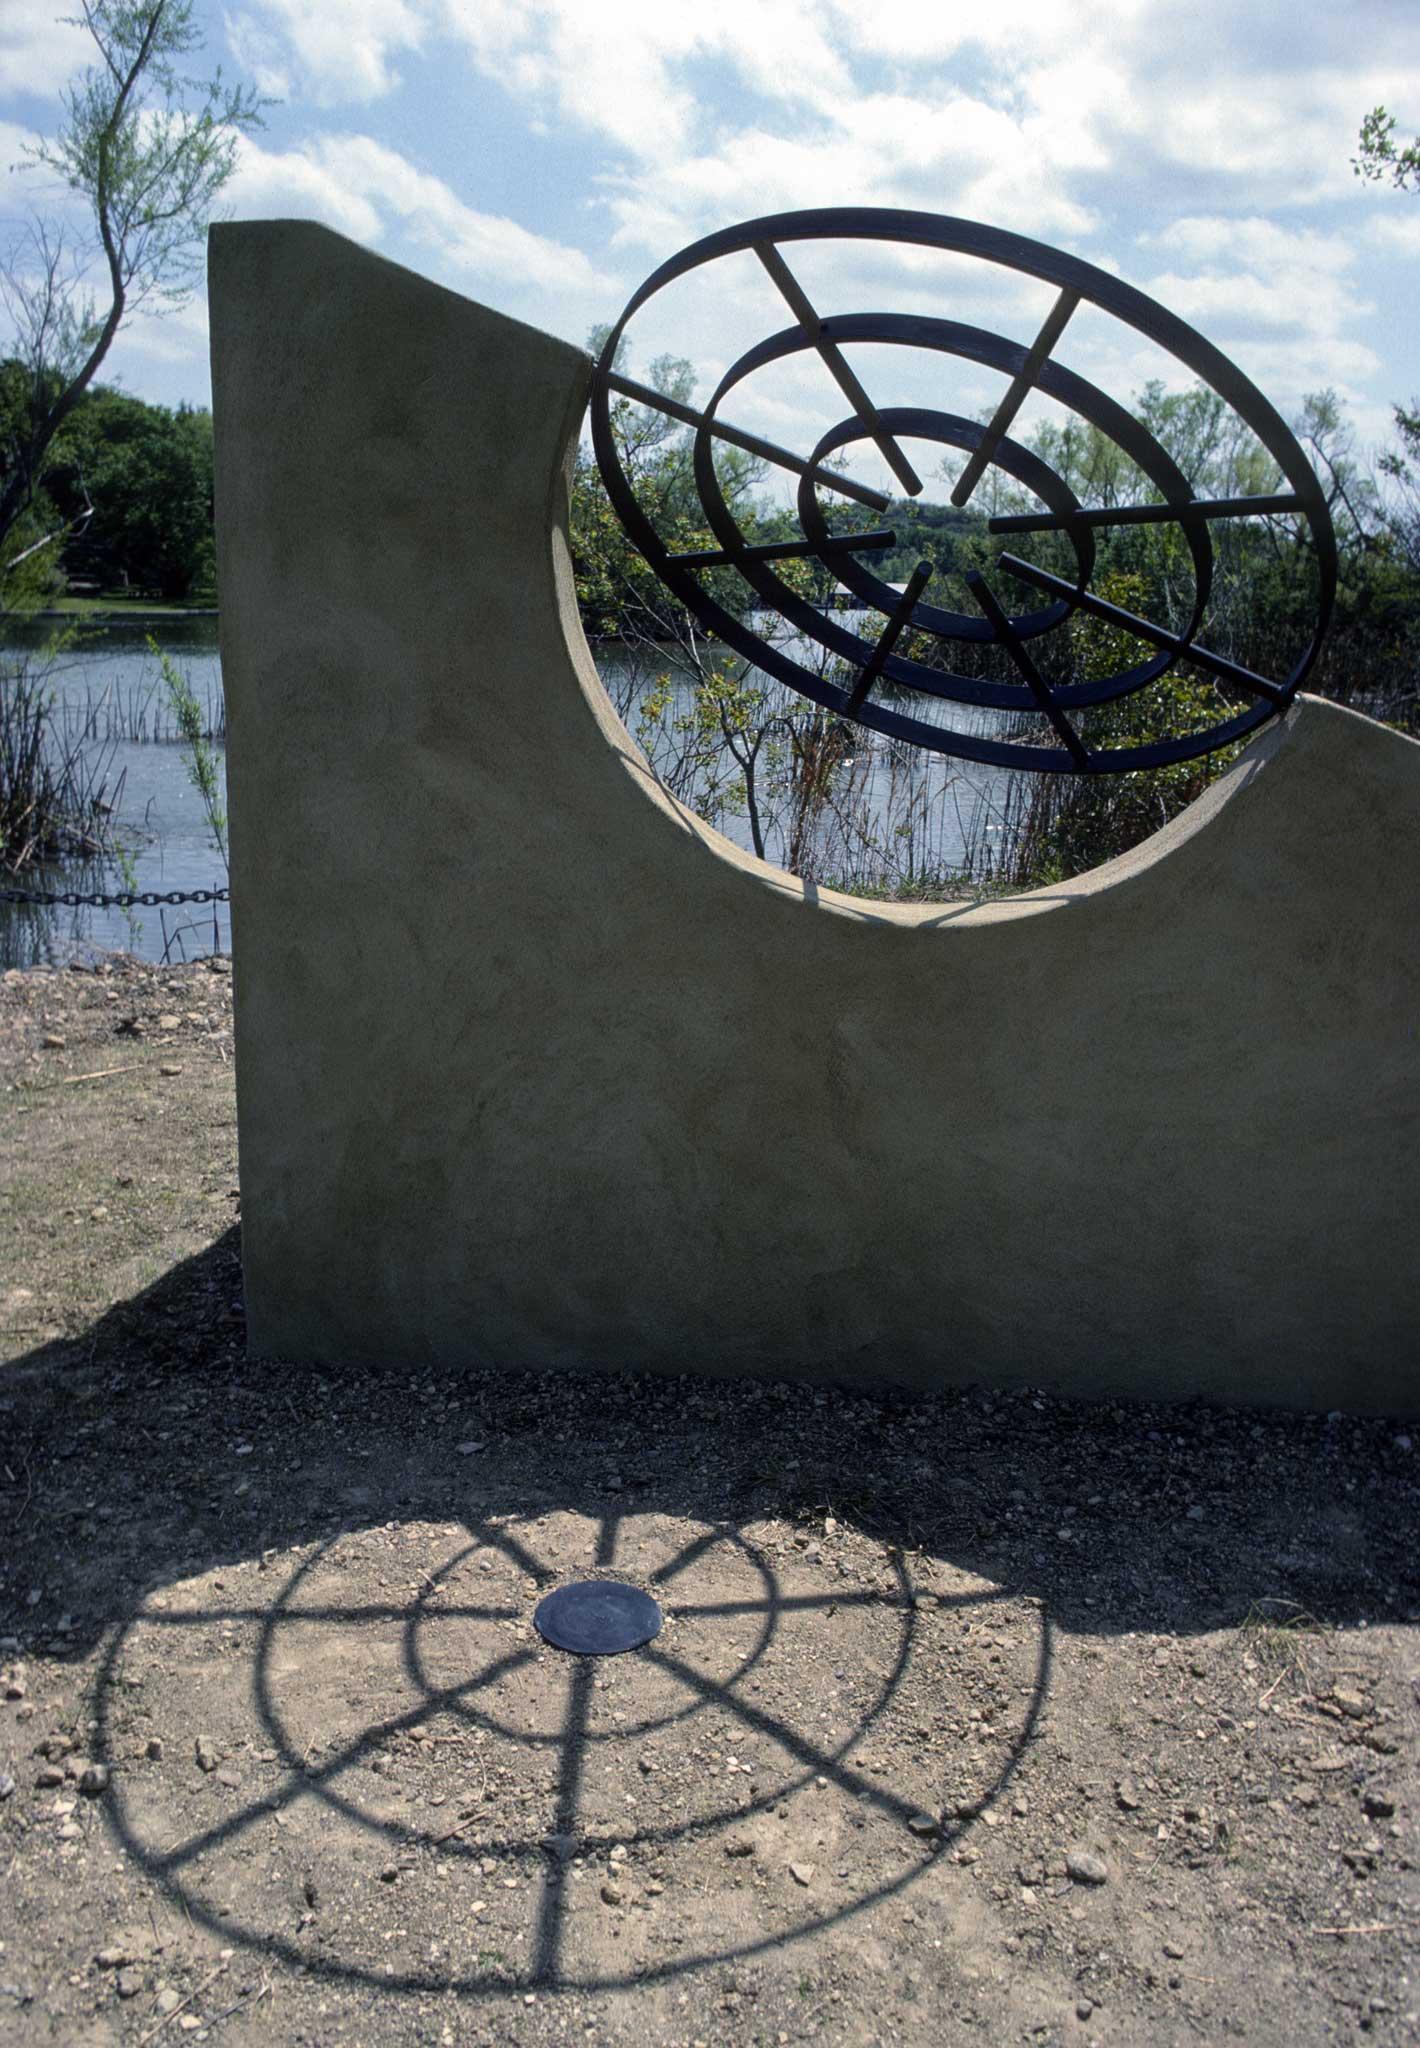 a short undulating stucco wall with two round metal grates incorporated into the structure built on a lush lake shoreline